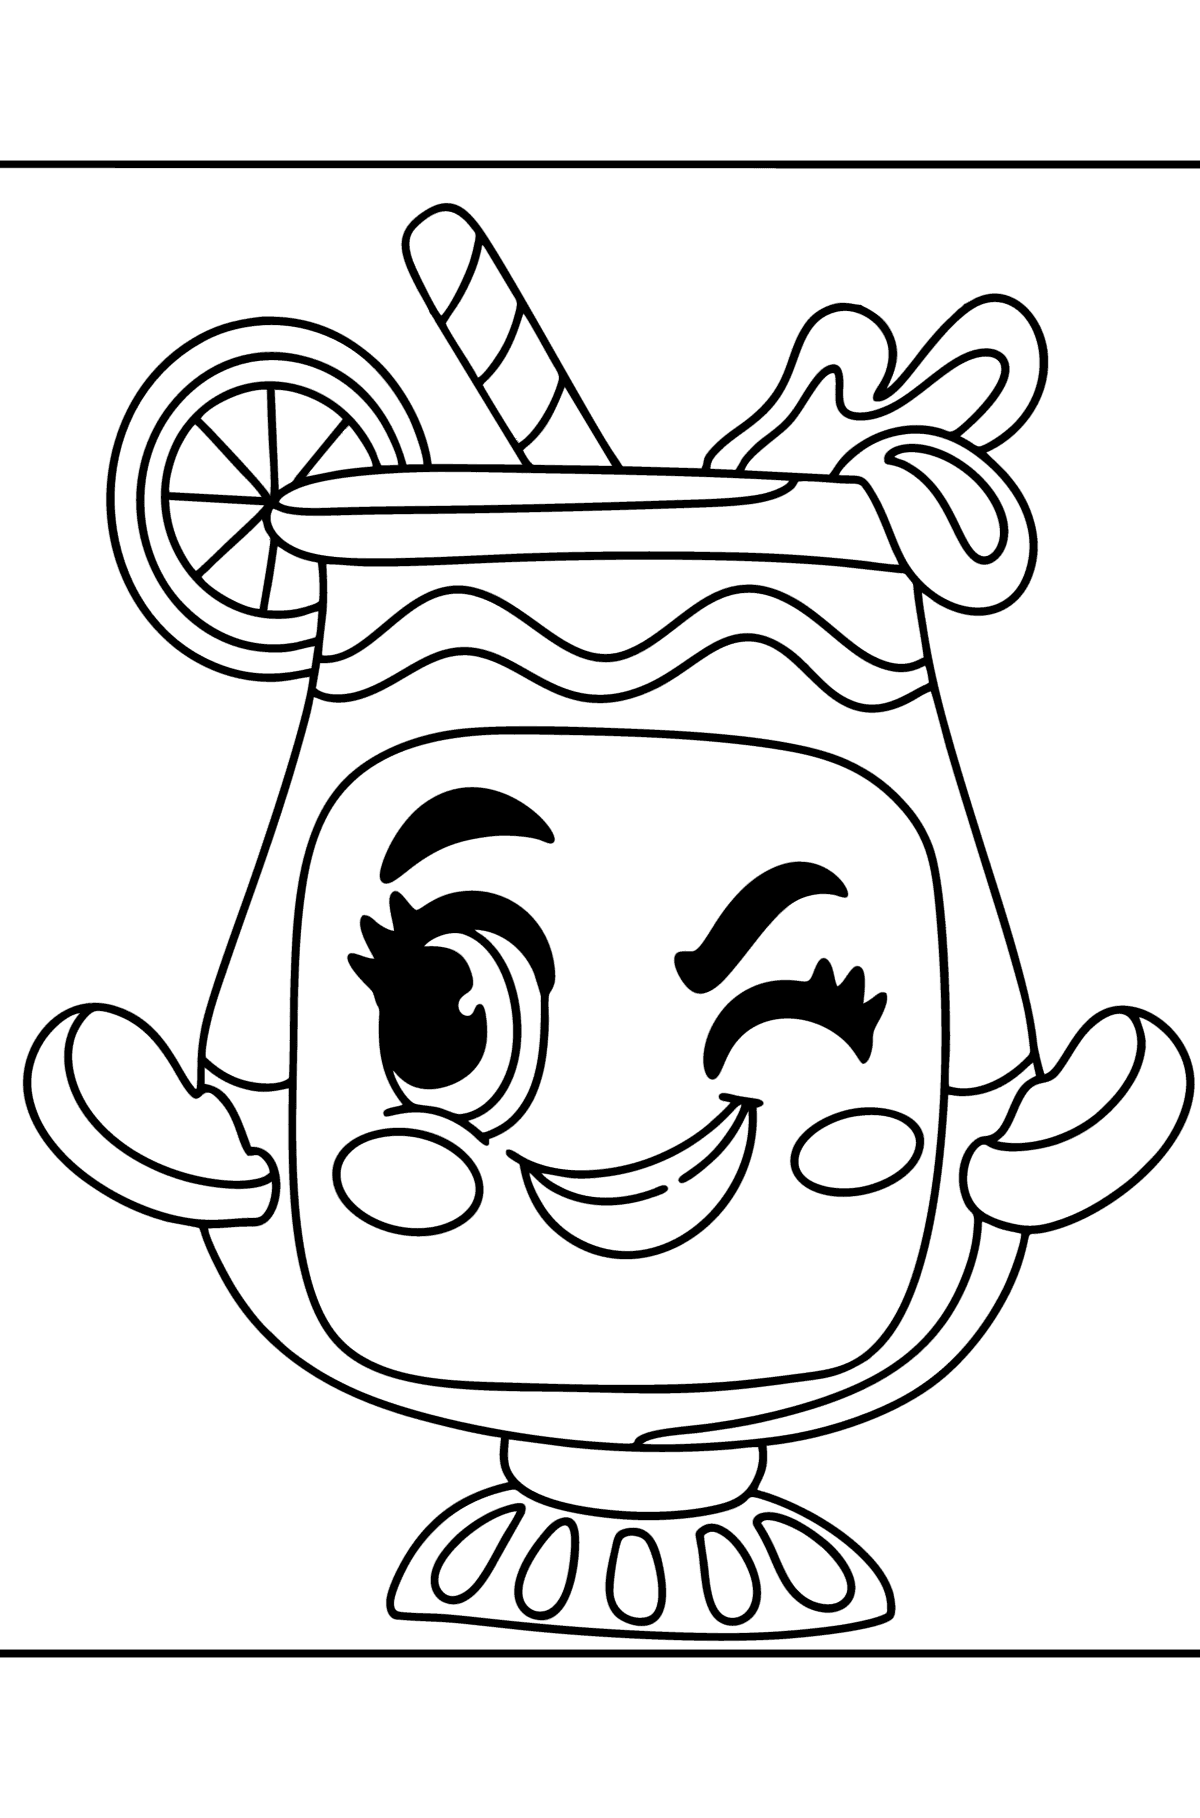 Coloring page MojiPops Fizzy - Coloring Pages for Kids